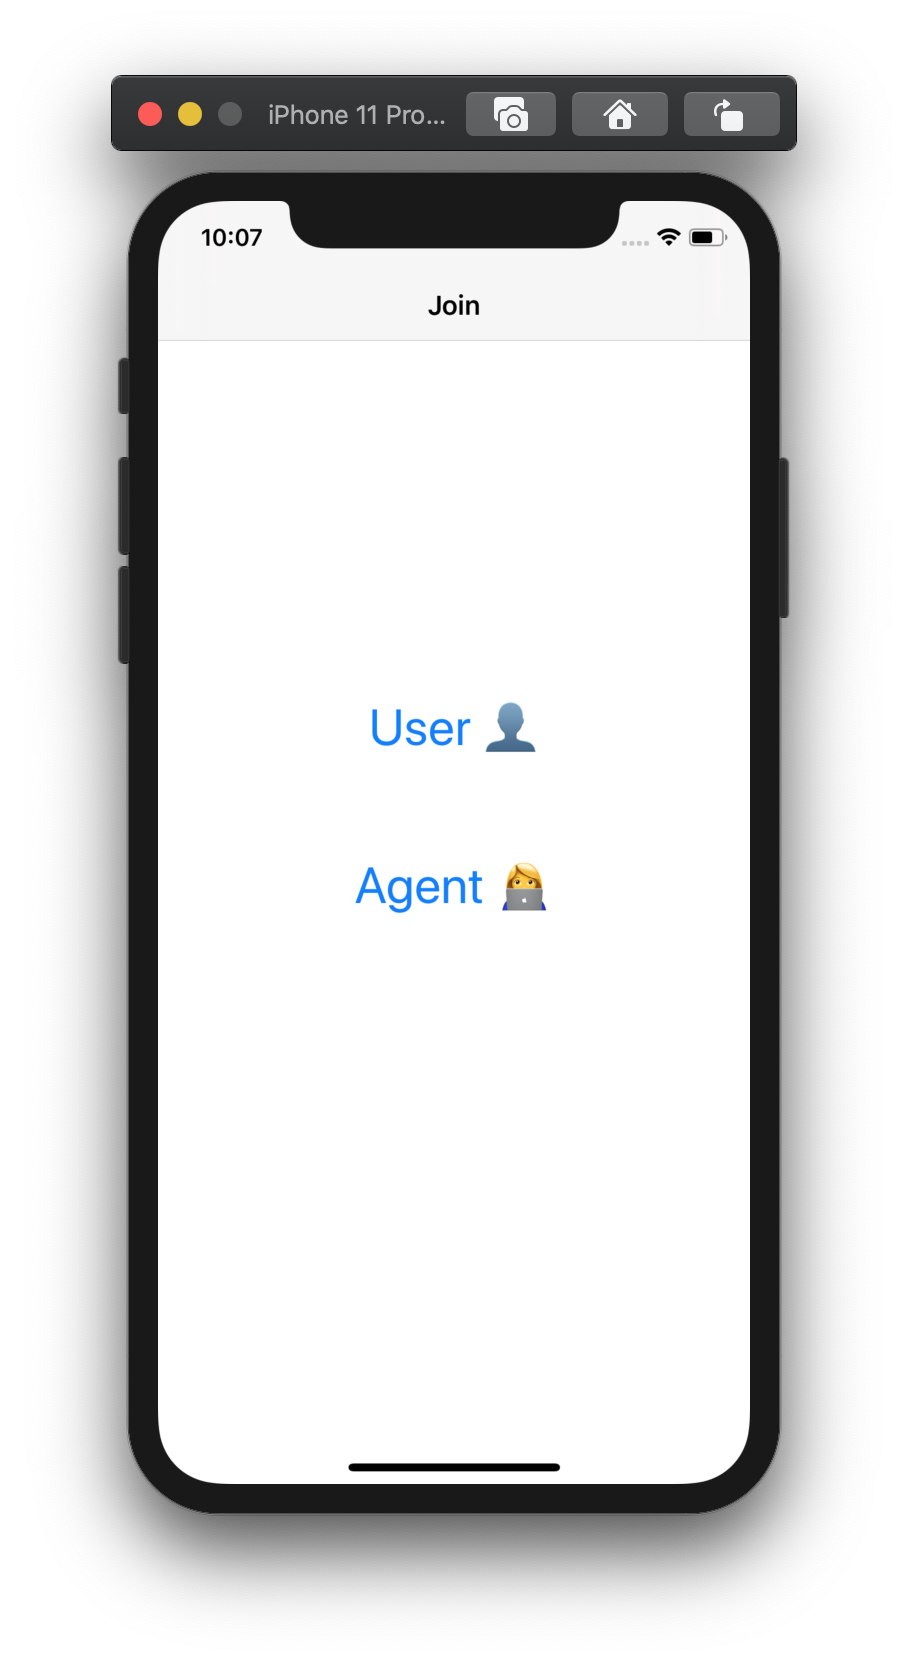 Screenshot shows an app with two buttons, one to join as a user, and the other to join as the agent